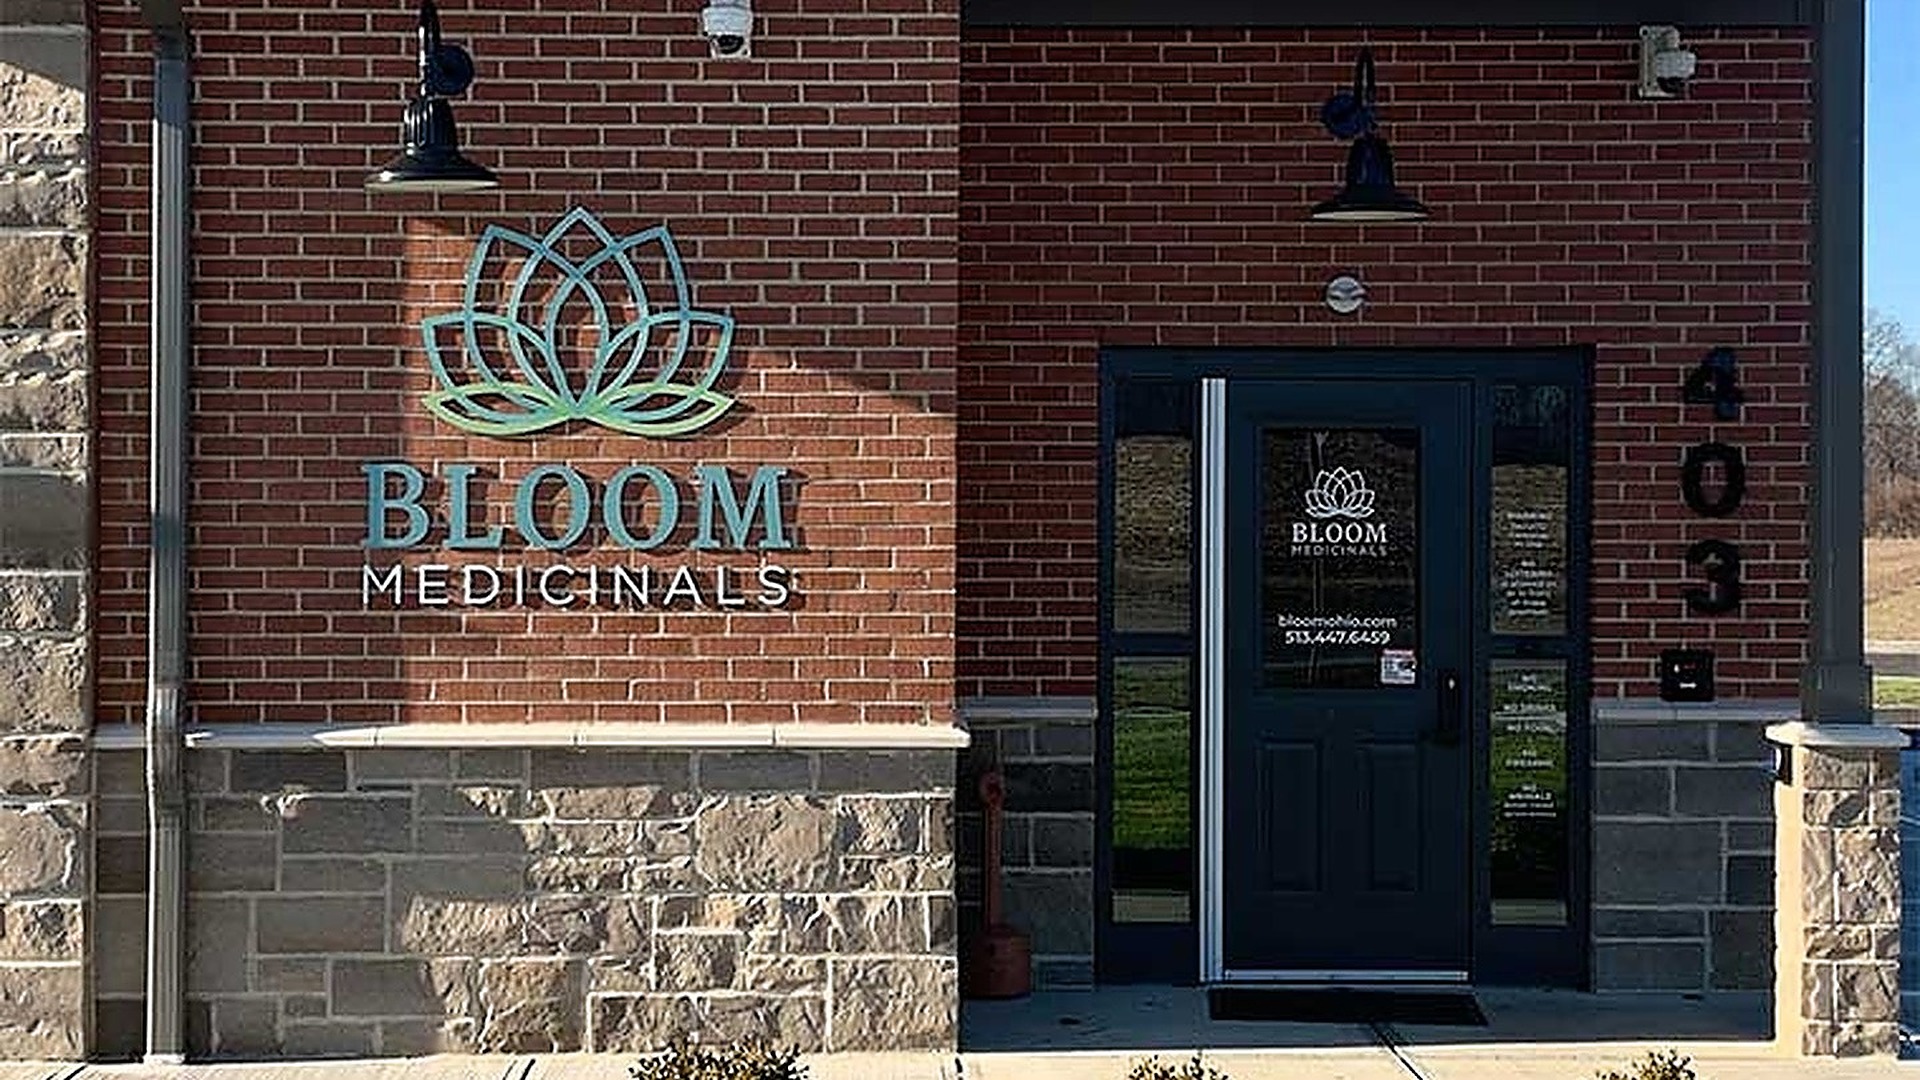 bloom medicinals painesville oh